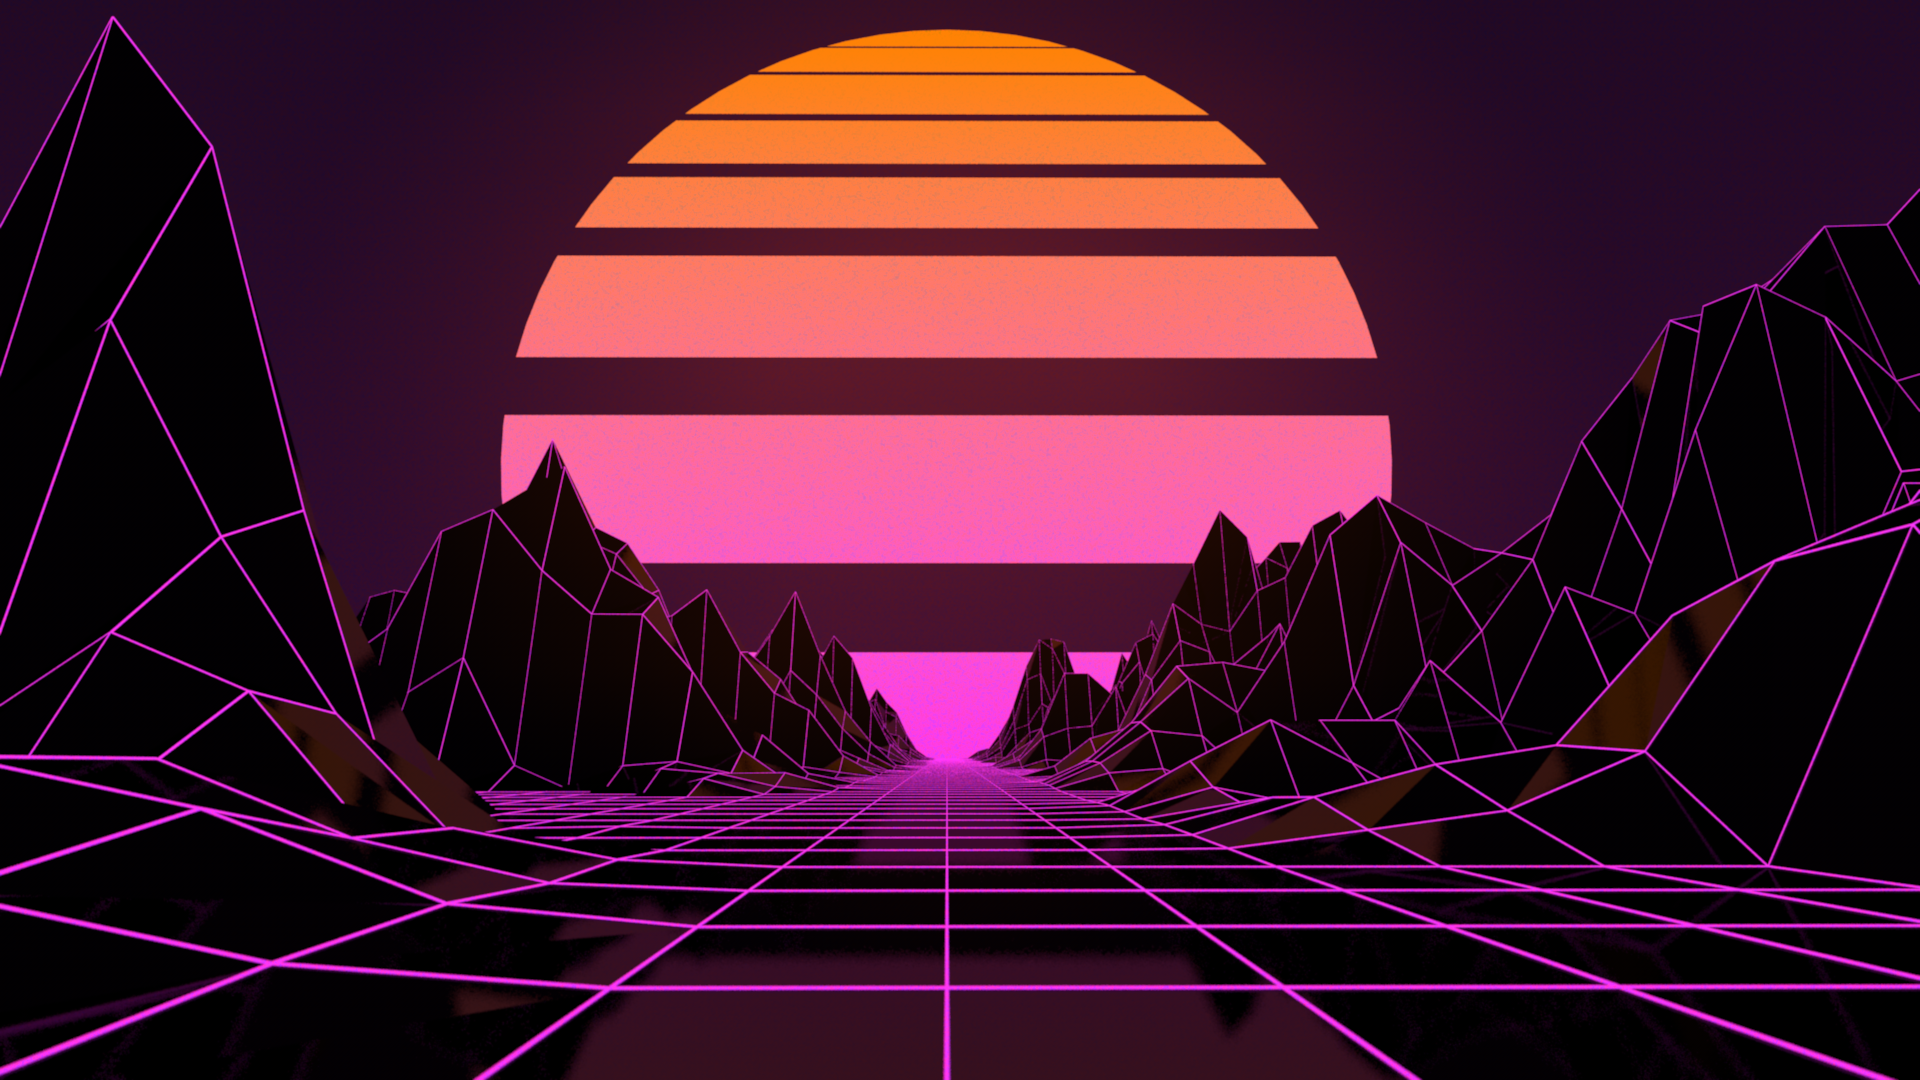 It S Cliche But I Tried My Hand At Making An Outrun Sunset R